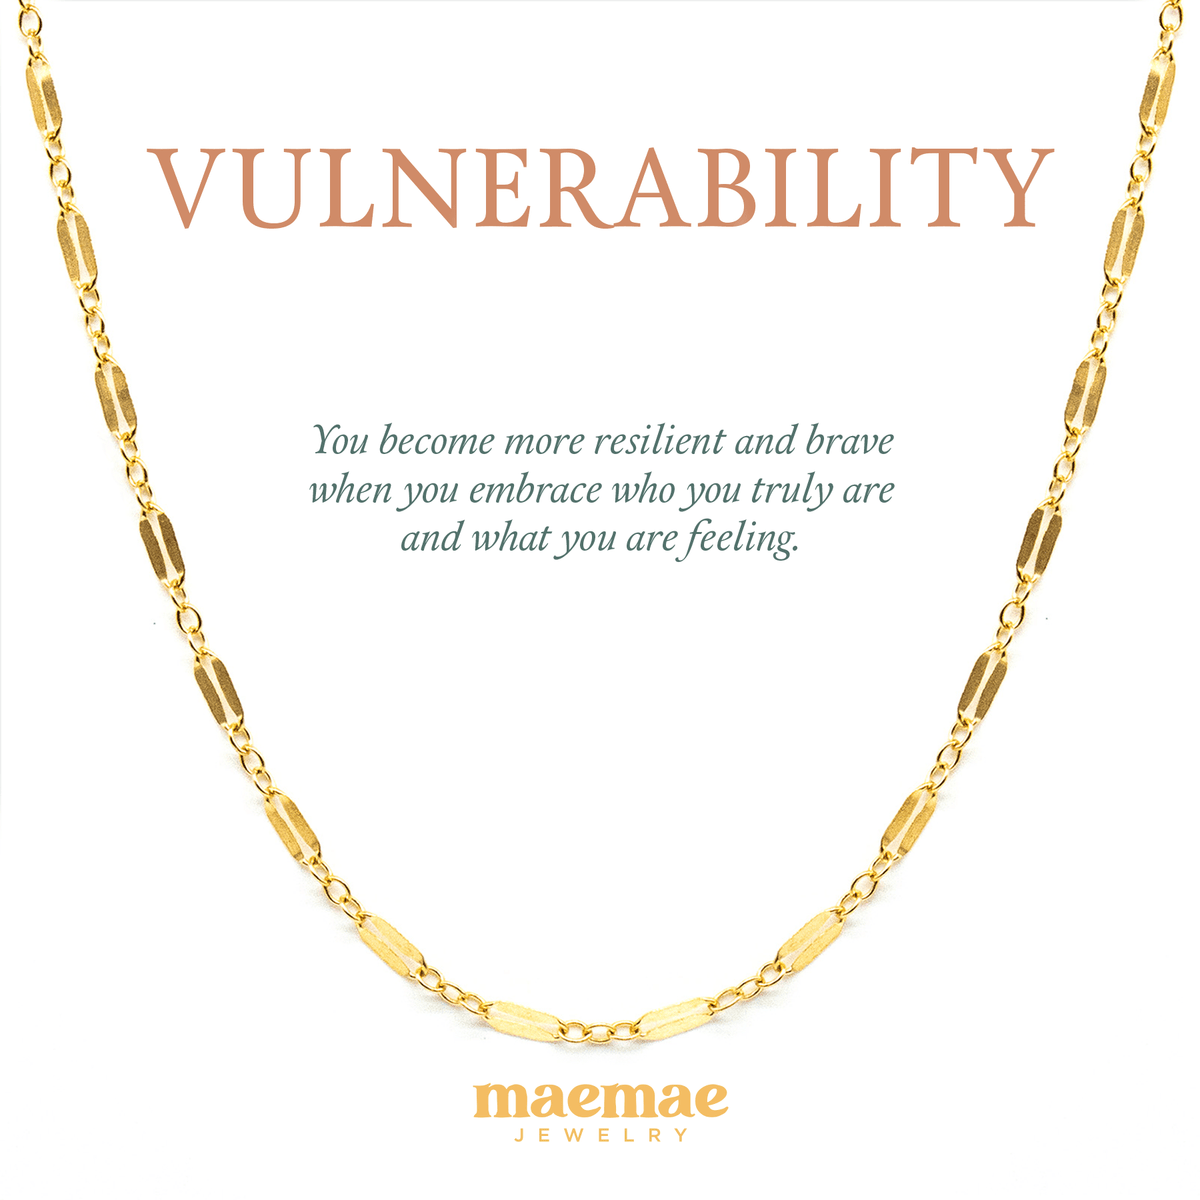 MaeMae Jewelry vulnerability necklace on affirmation card